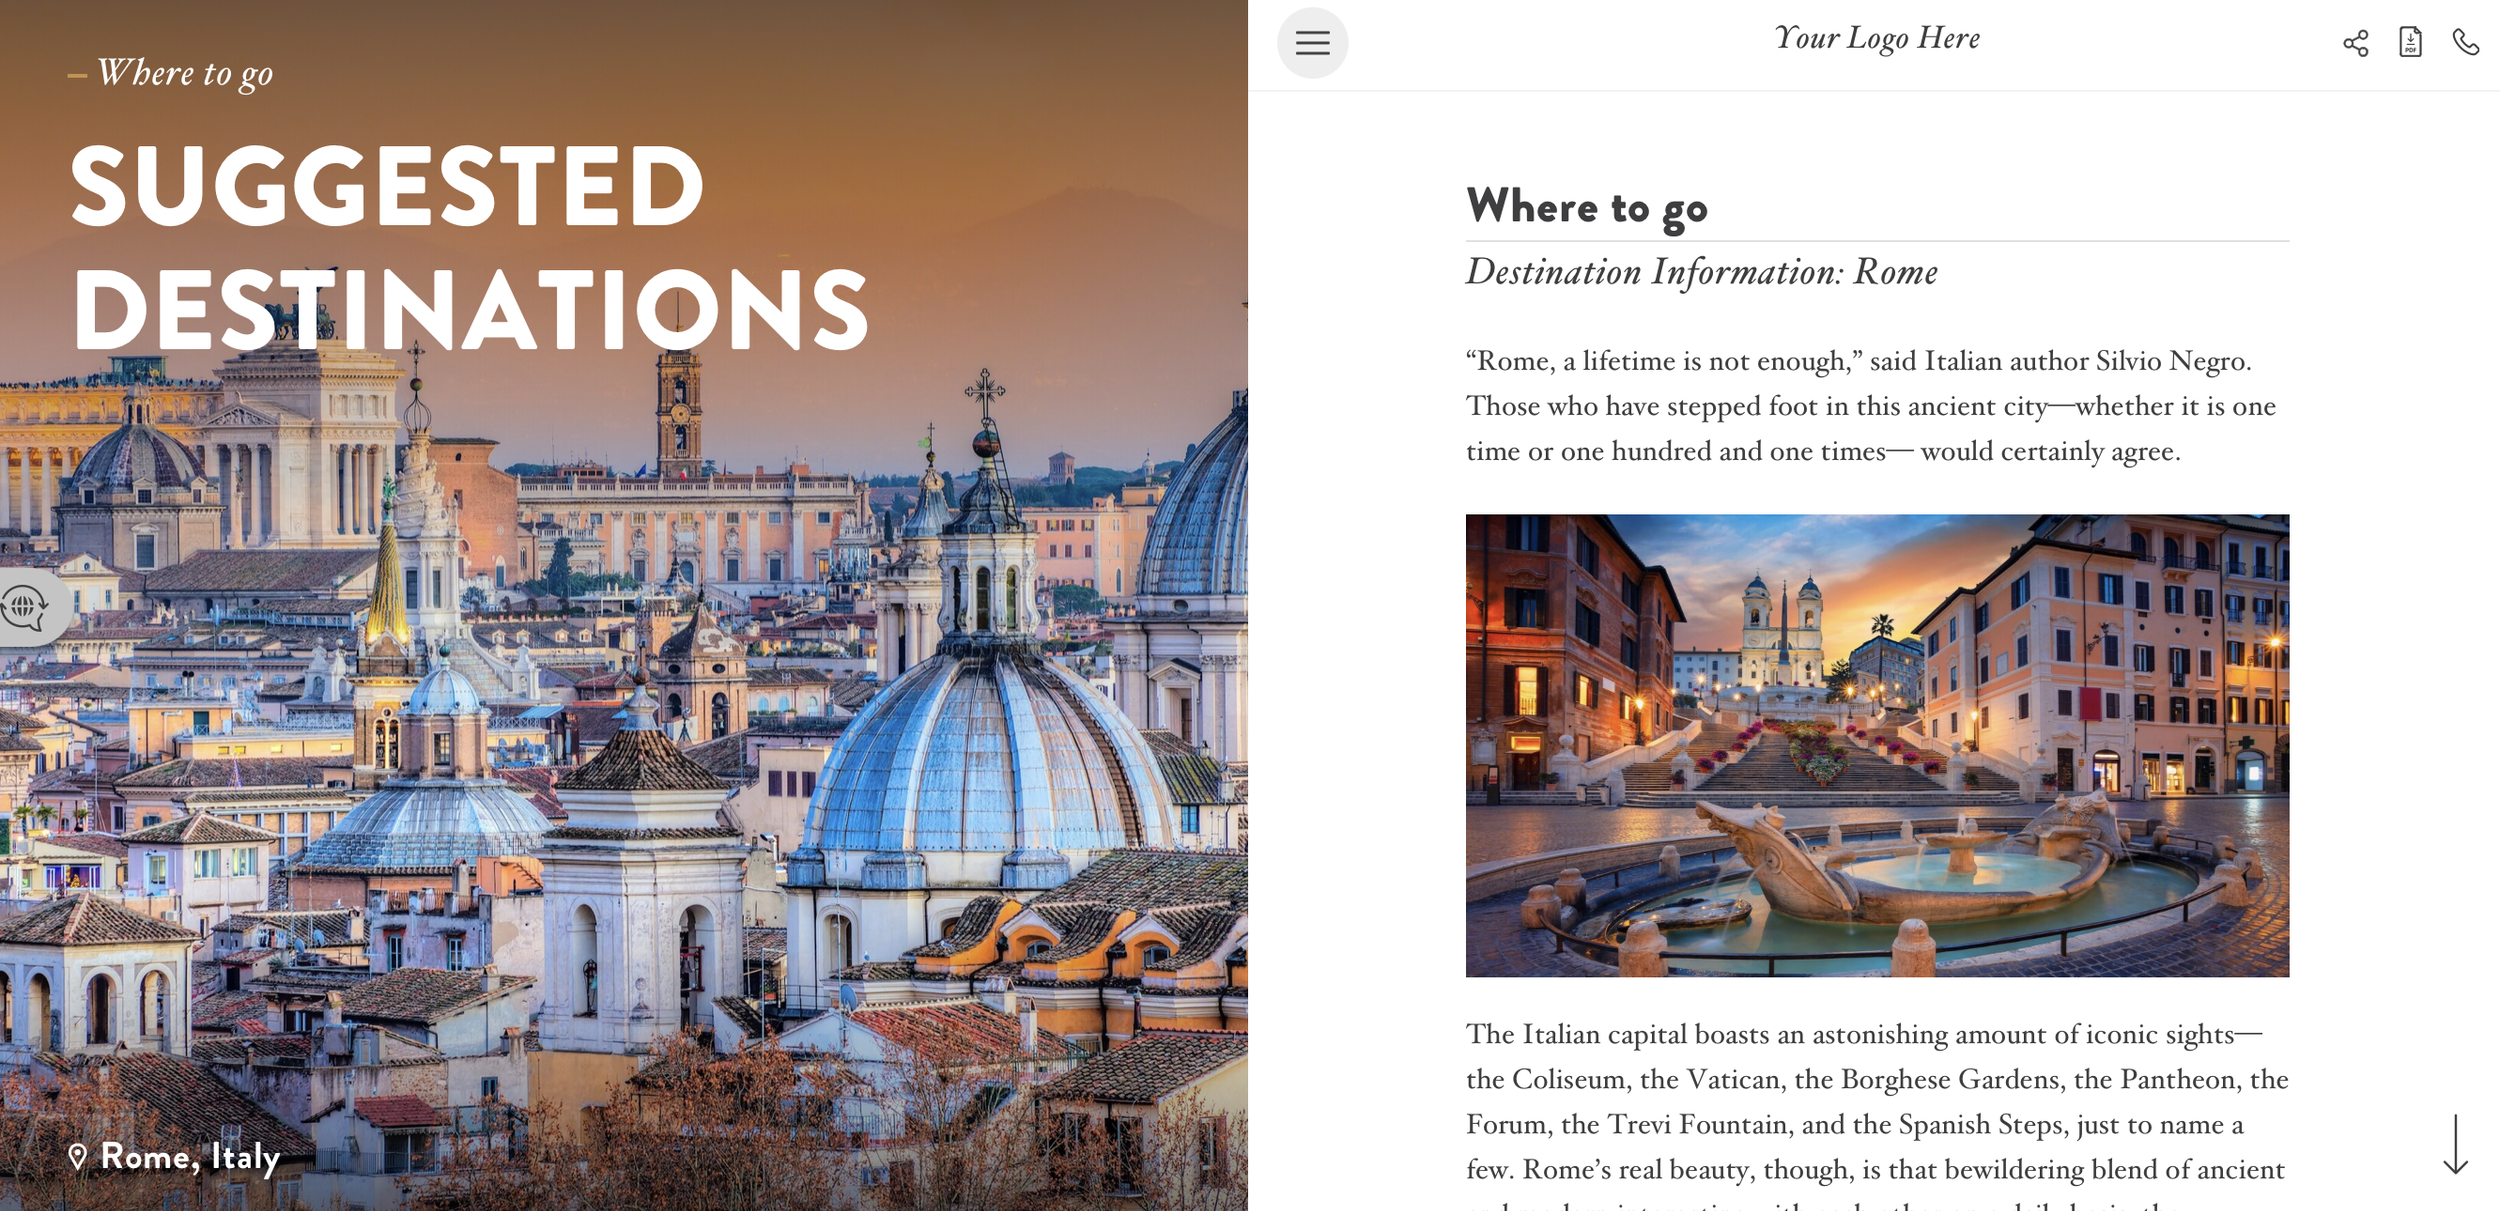 Honeymoon Inspiration Guide to Italy